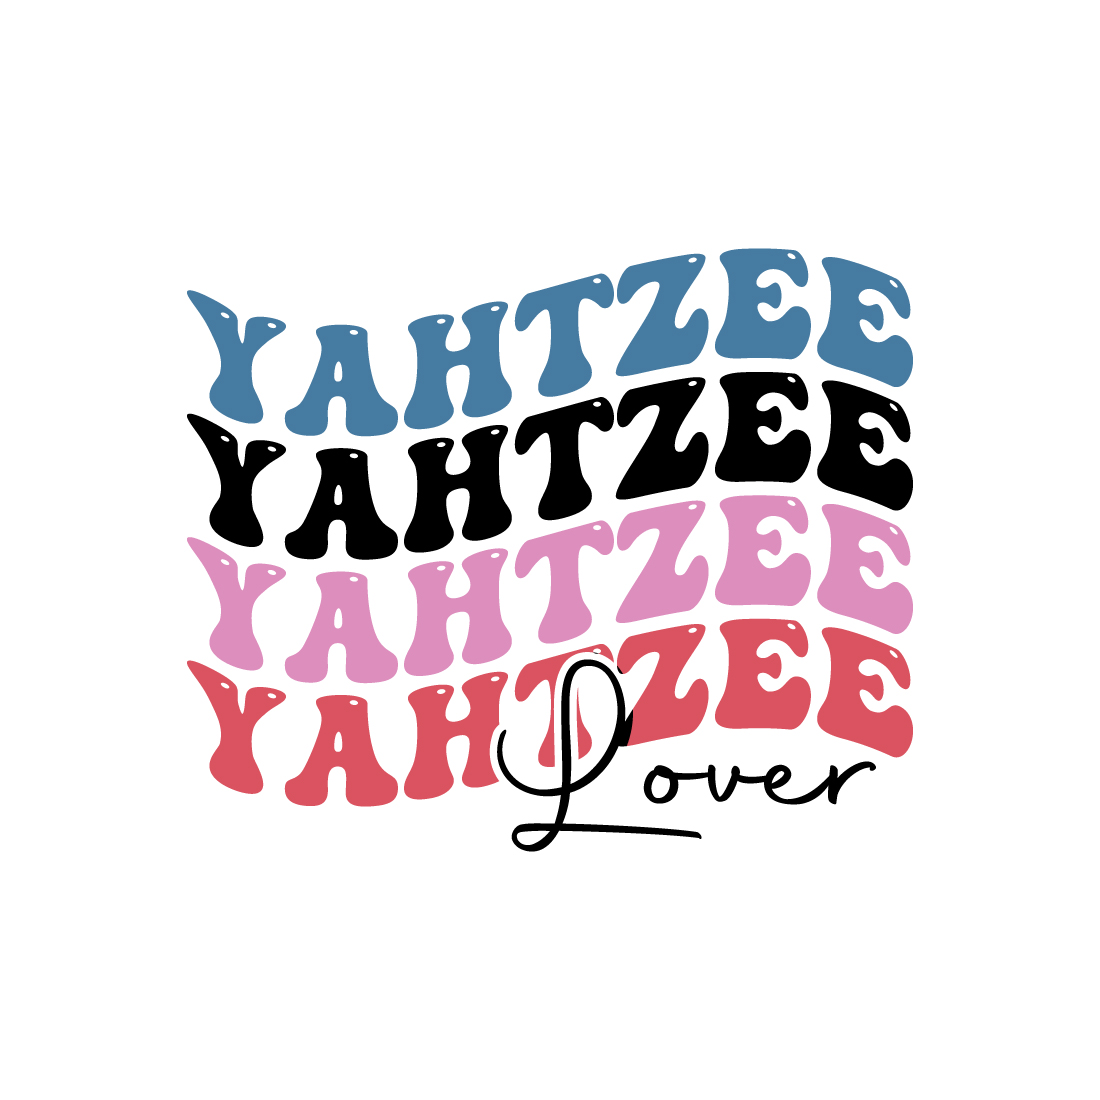 Yahtzee lover indoor game retro typography design for t-shirts, cards, frame artwork, phone cases, bags, mugs, stickers, tumblers, print, etc preview image.